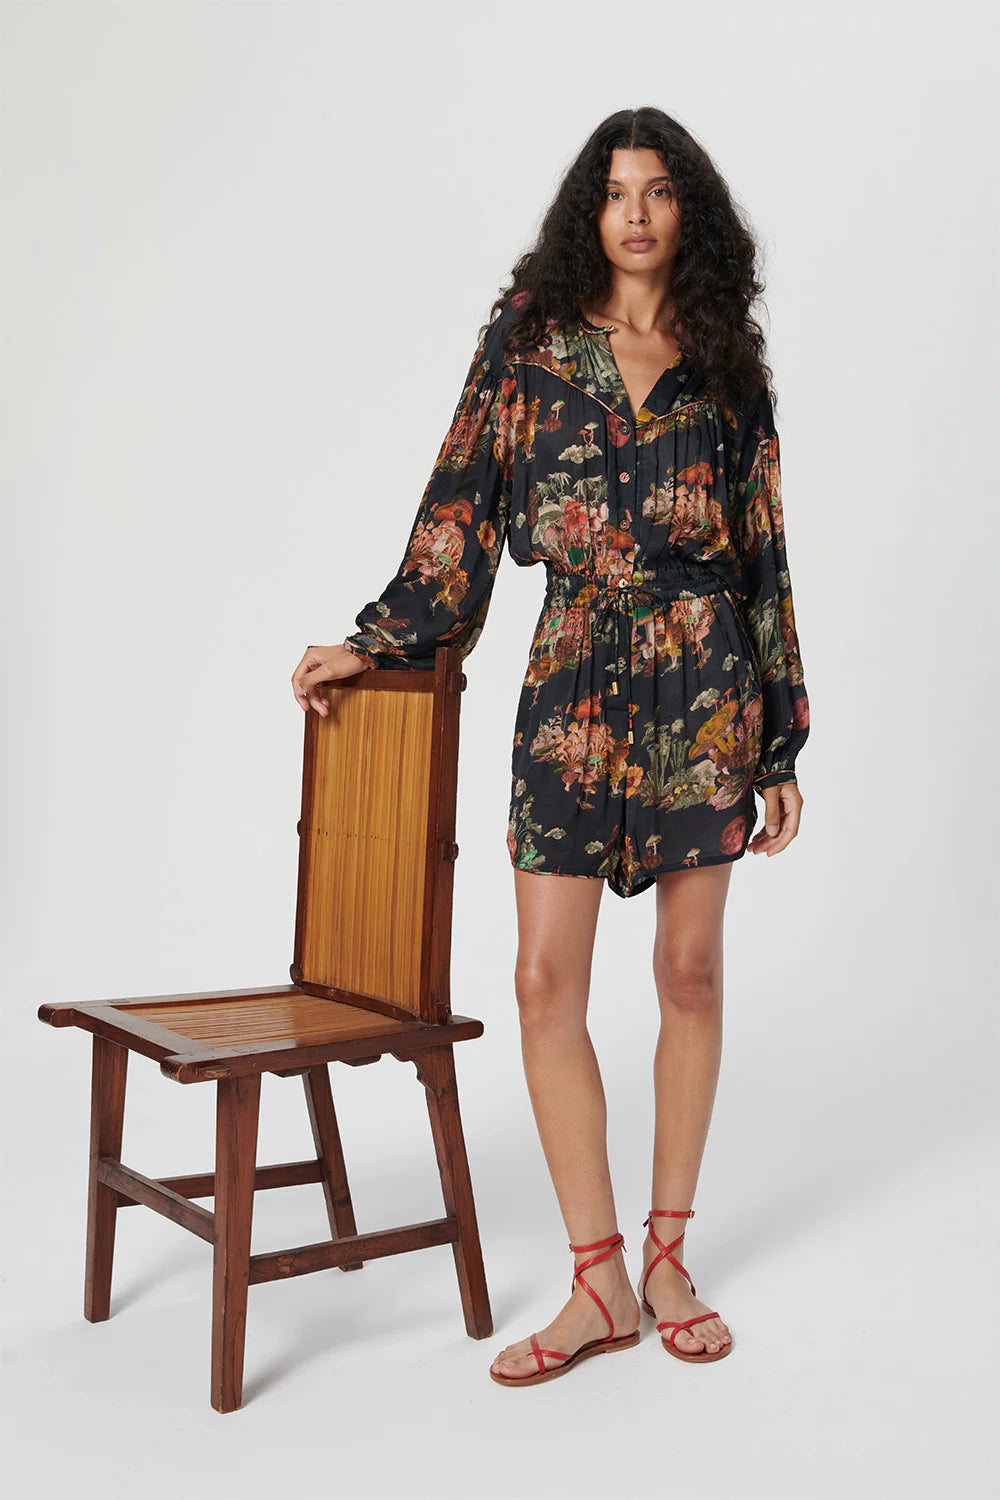 Bamboo Playsuit